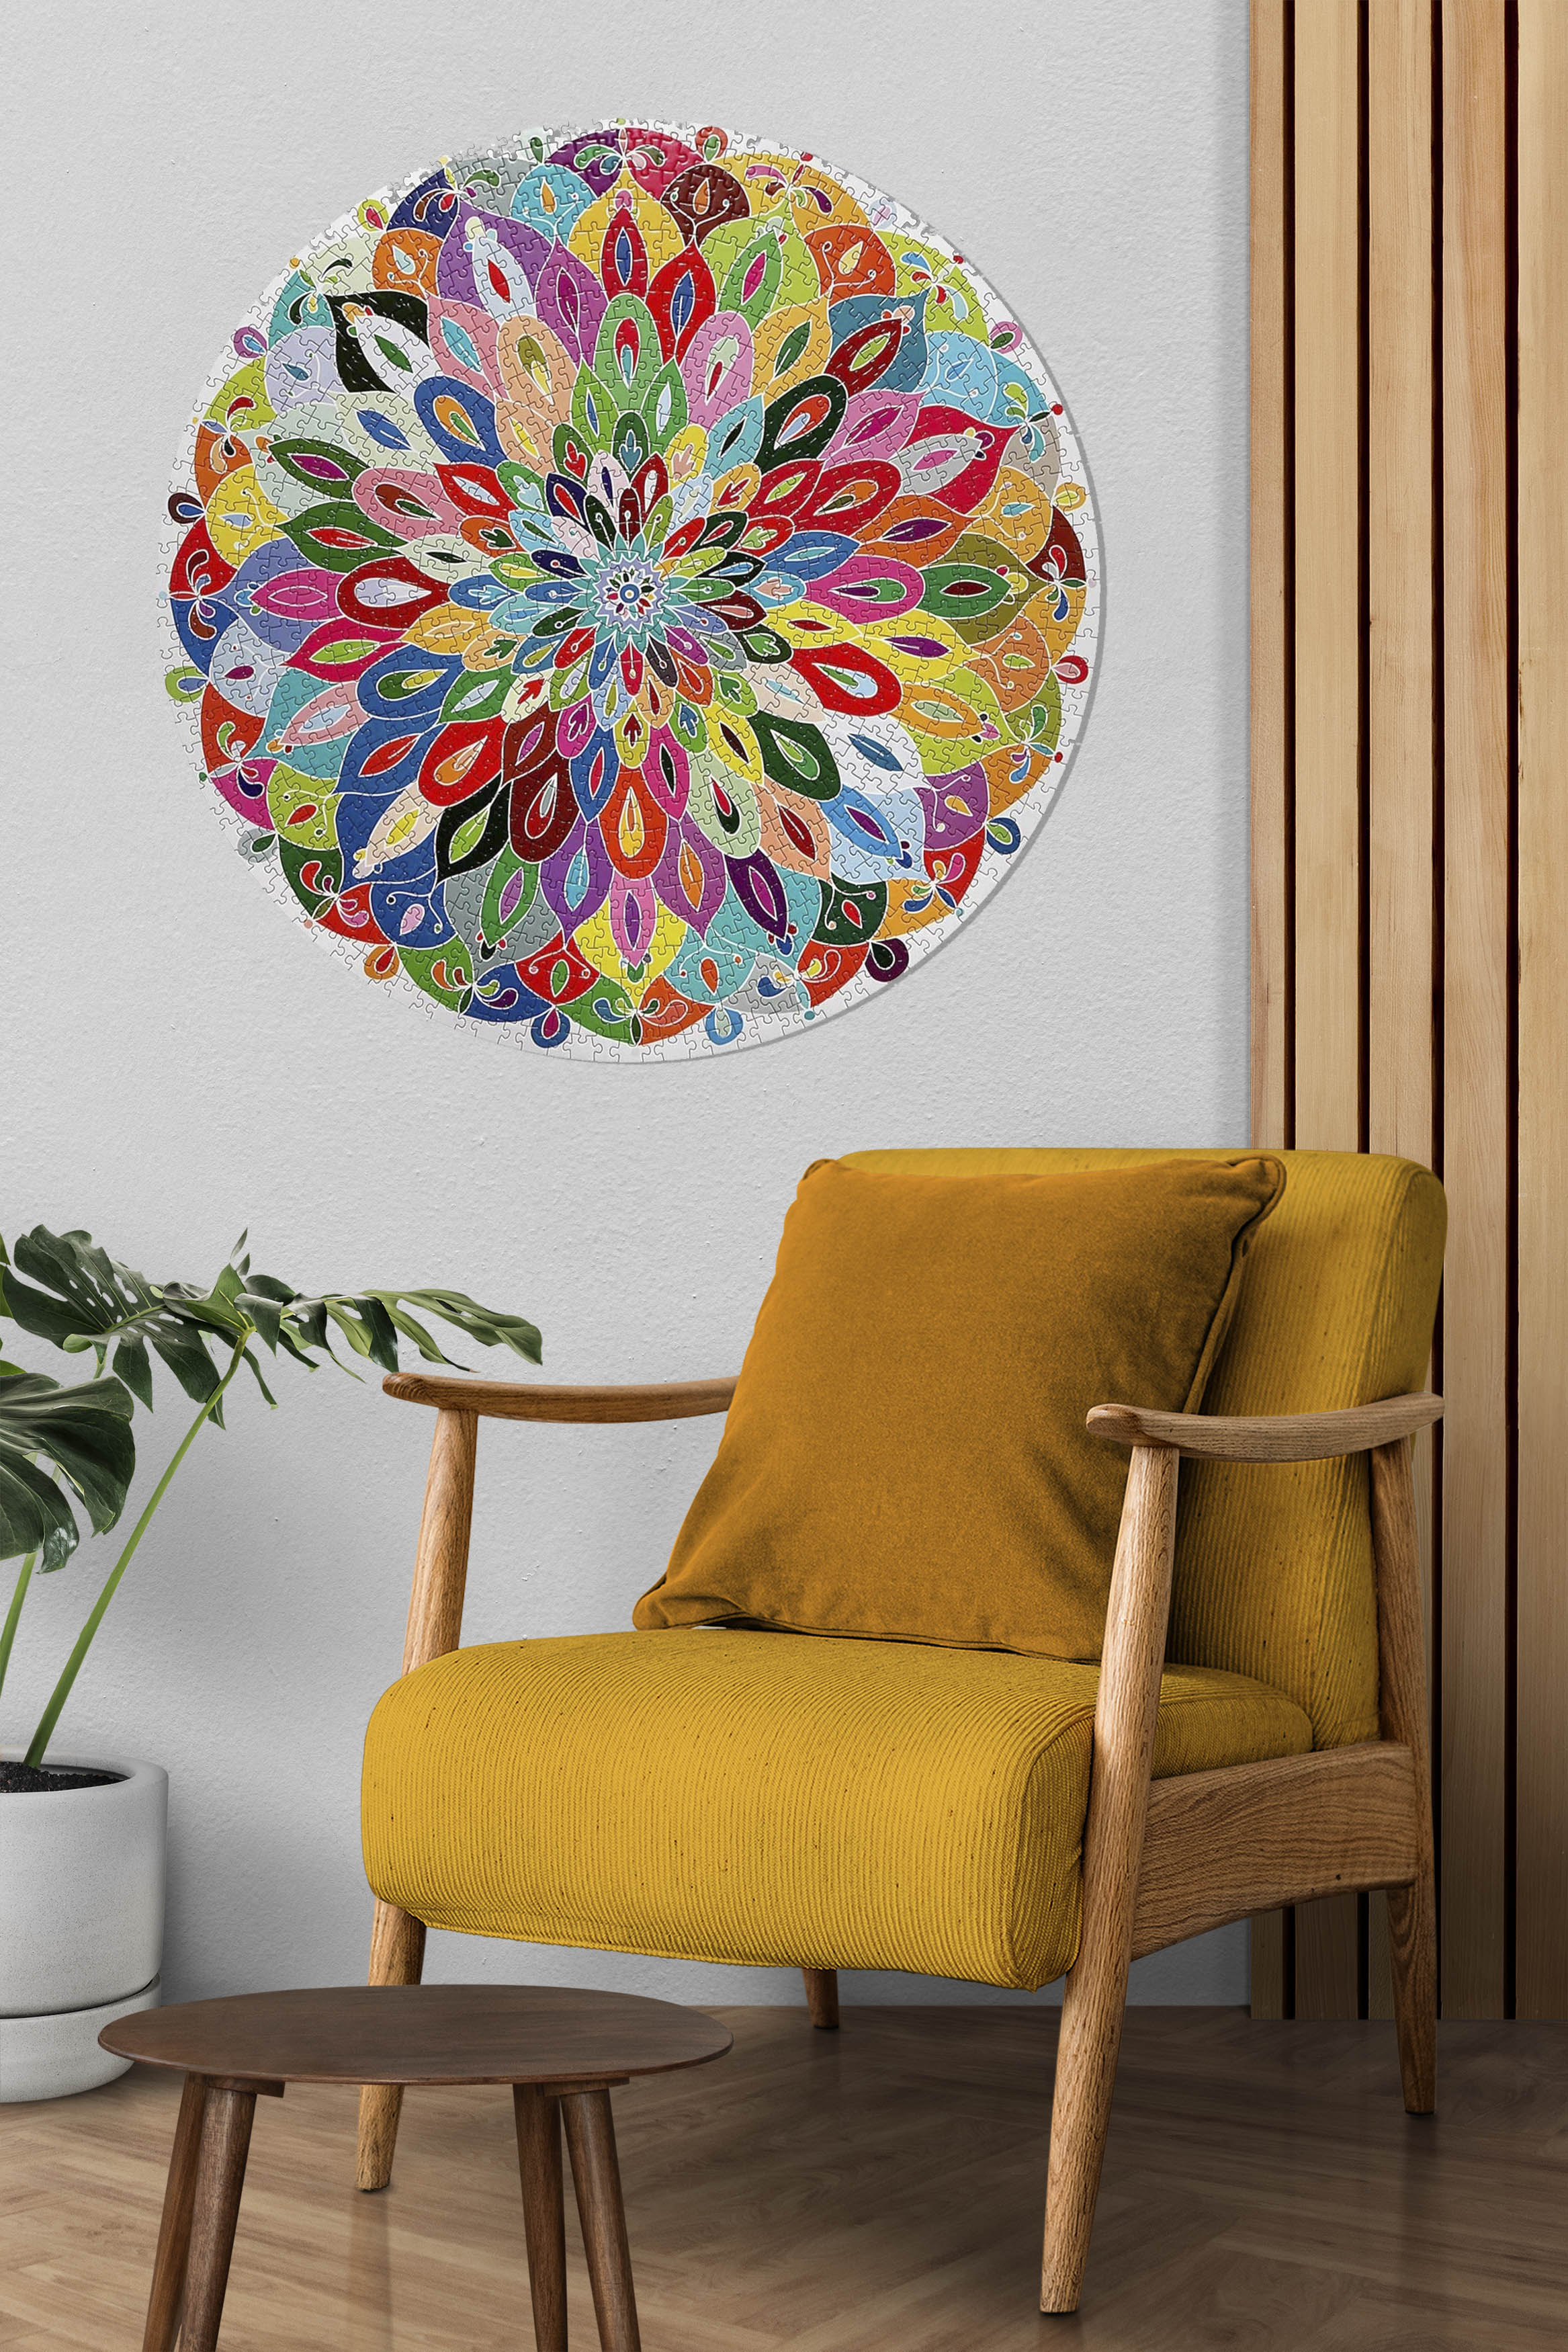 The mandala gets a Pop Art-style makeover in this fun colourful jigsaw puzzle. With 1000 unique pieces and a circle shape, this adult puzzle will keep you occupied for hours.